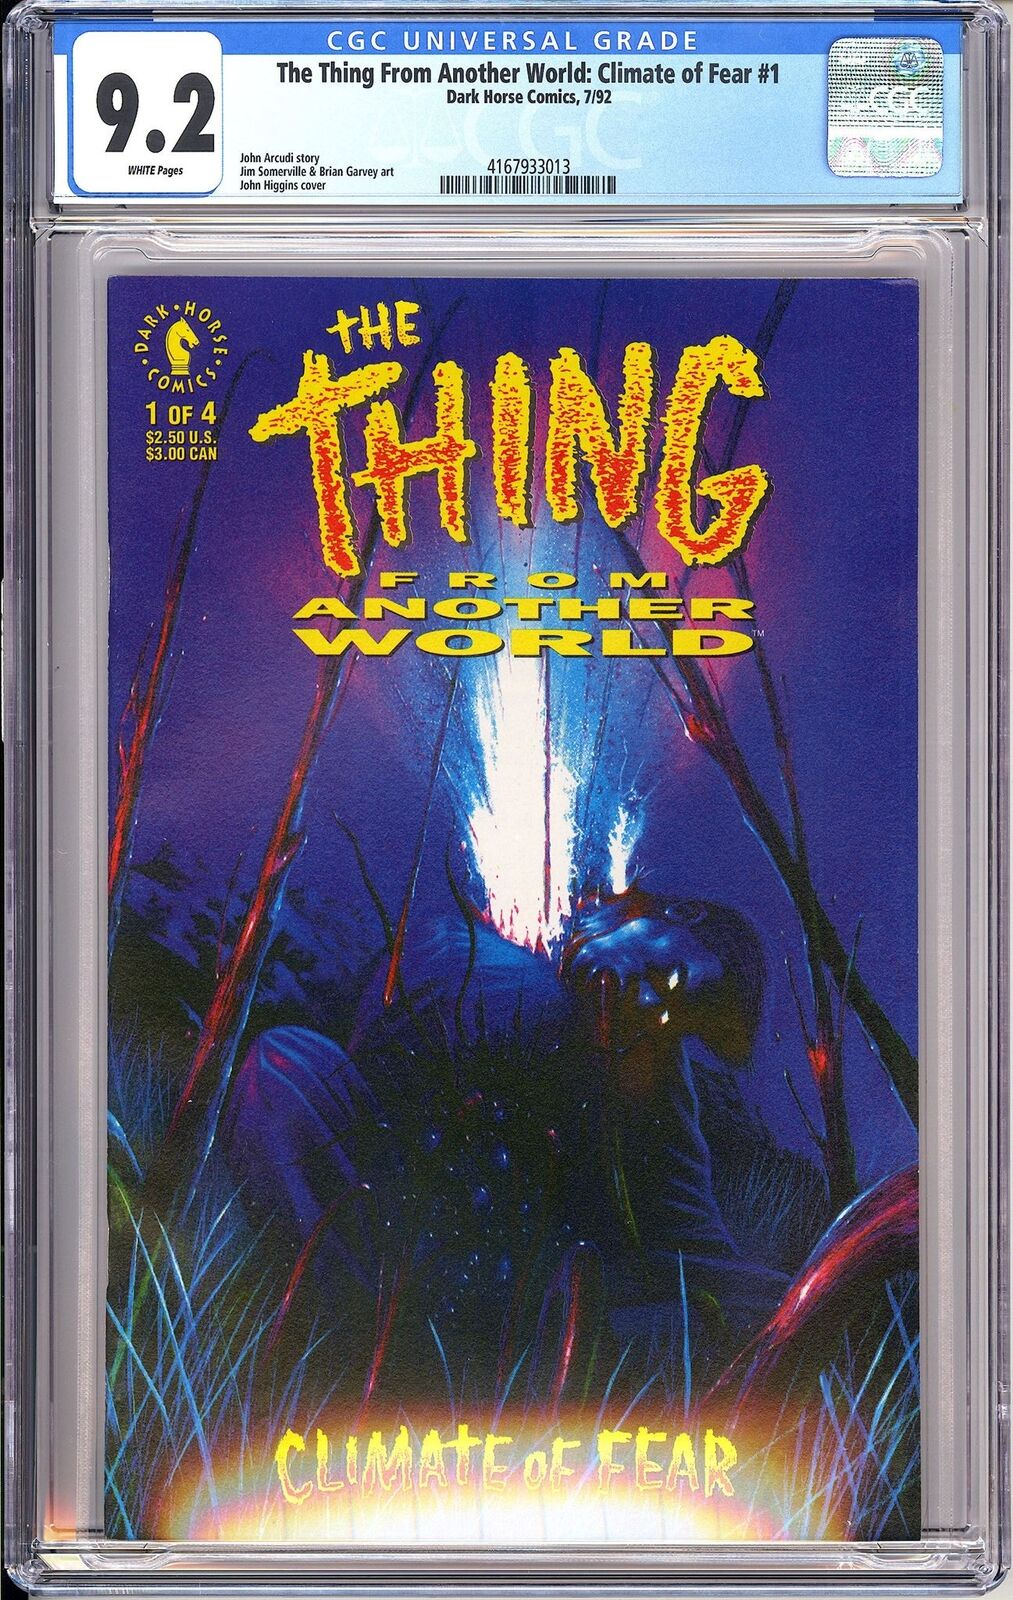 Thing From Another World: Climate of Fear 1 CGC 9.2 1992 4167933013 Dark Horse